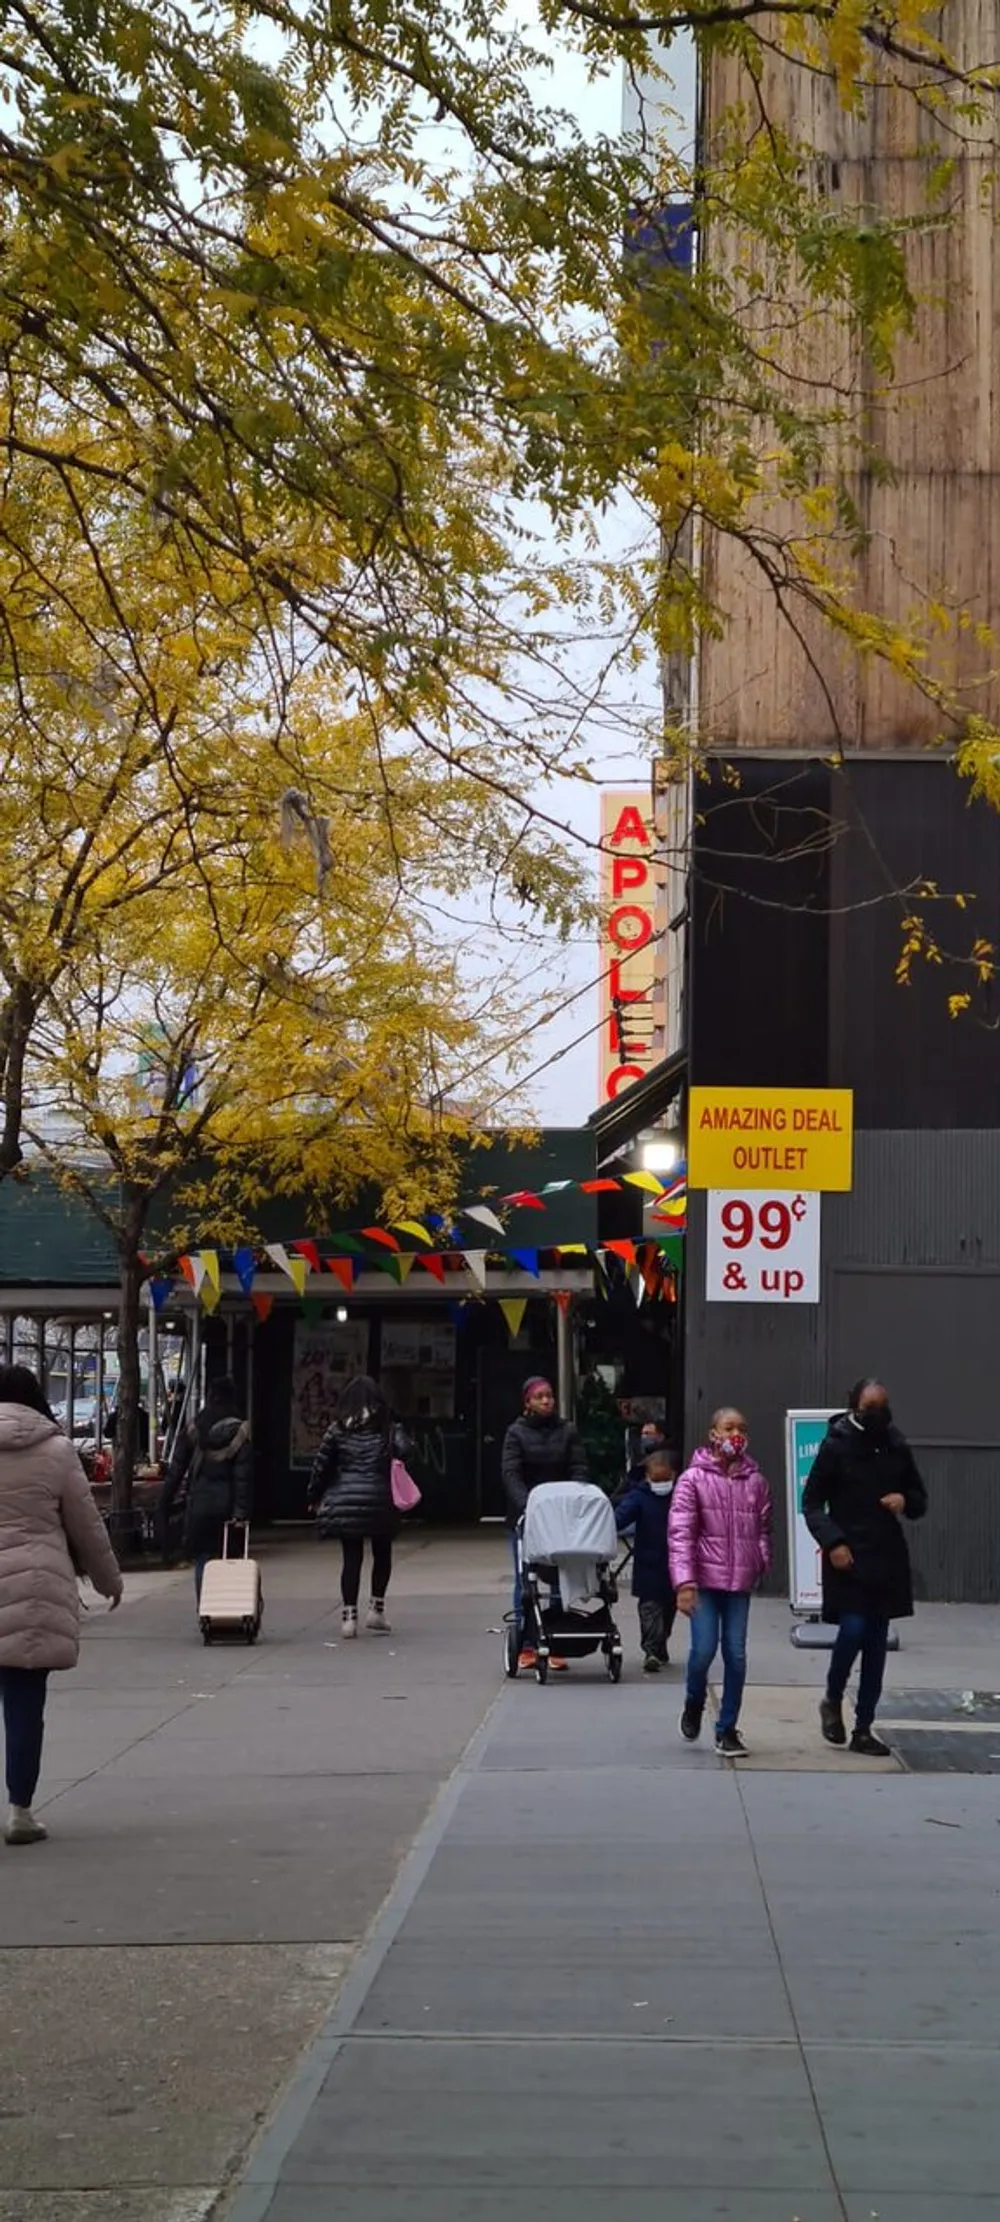 This image captures a bustling city sidewalk scene with pedestrians autumnal trees and a store with a sign advertising an AMAZING DEAL 99  up under a marquee that reads APOLLO